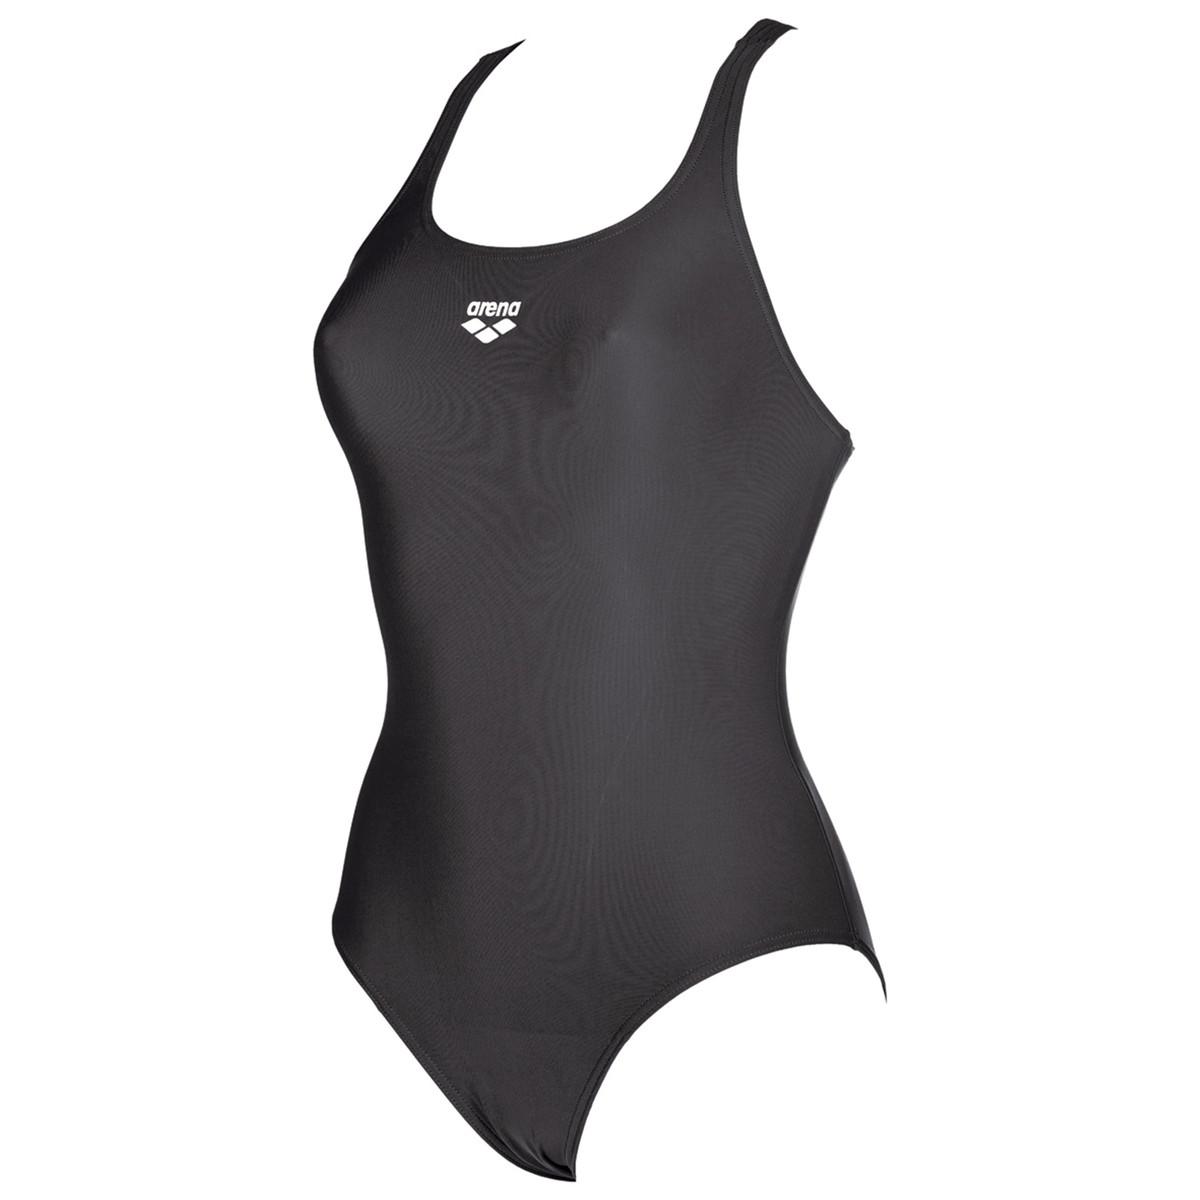 Lyst - Arena Swimsuit in Black - Save 13%